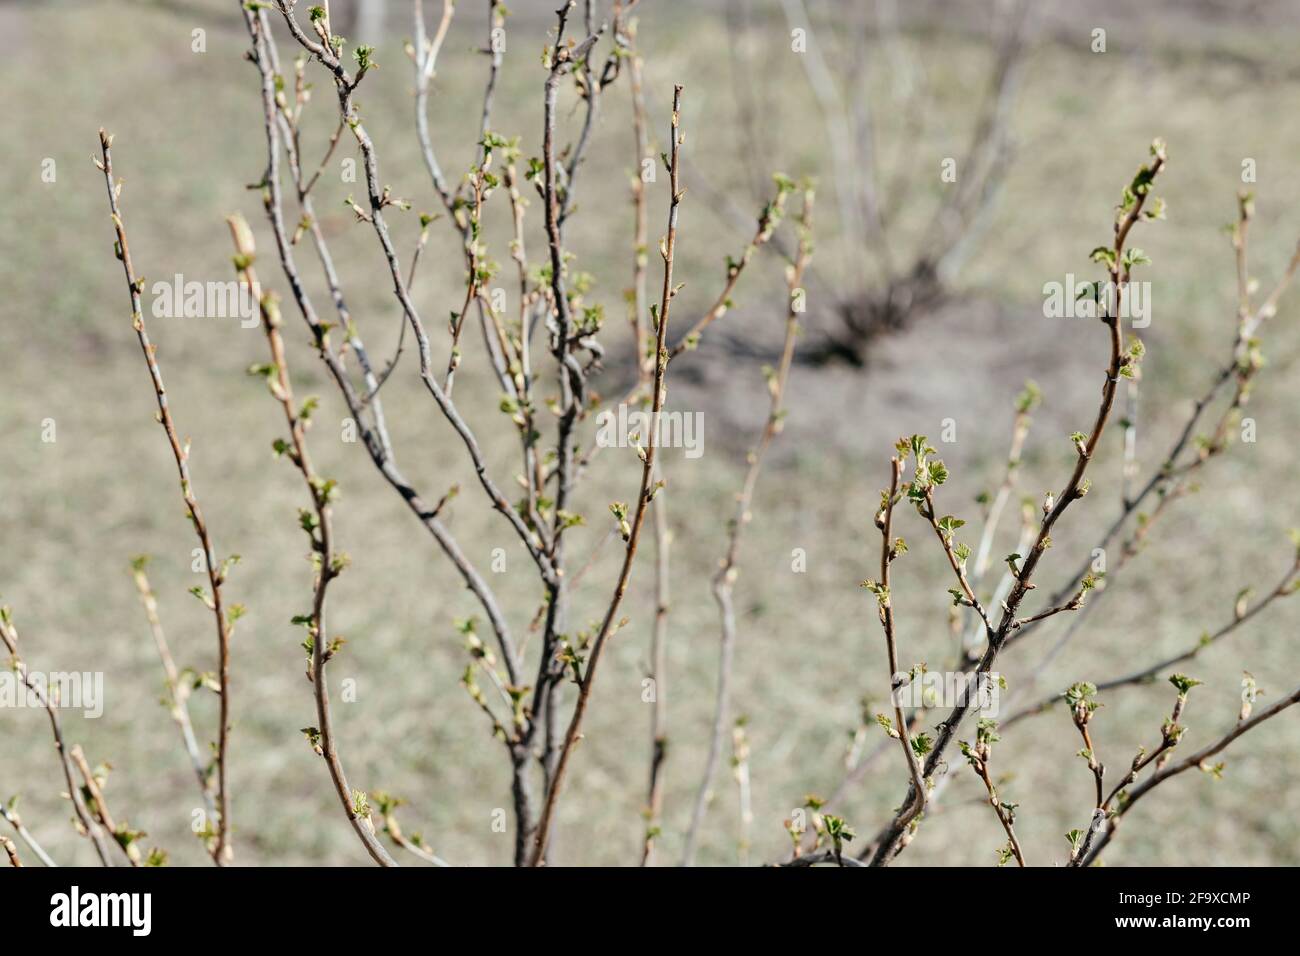 Currant bush with small green leaves on a spring day. Place for your text. Stock Photo